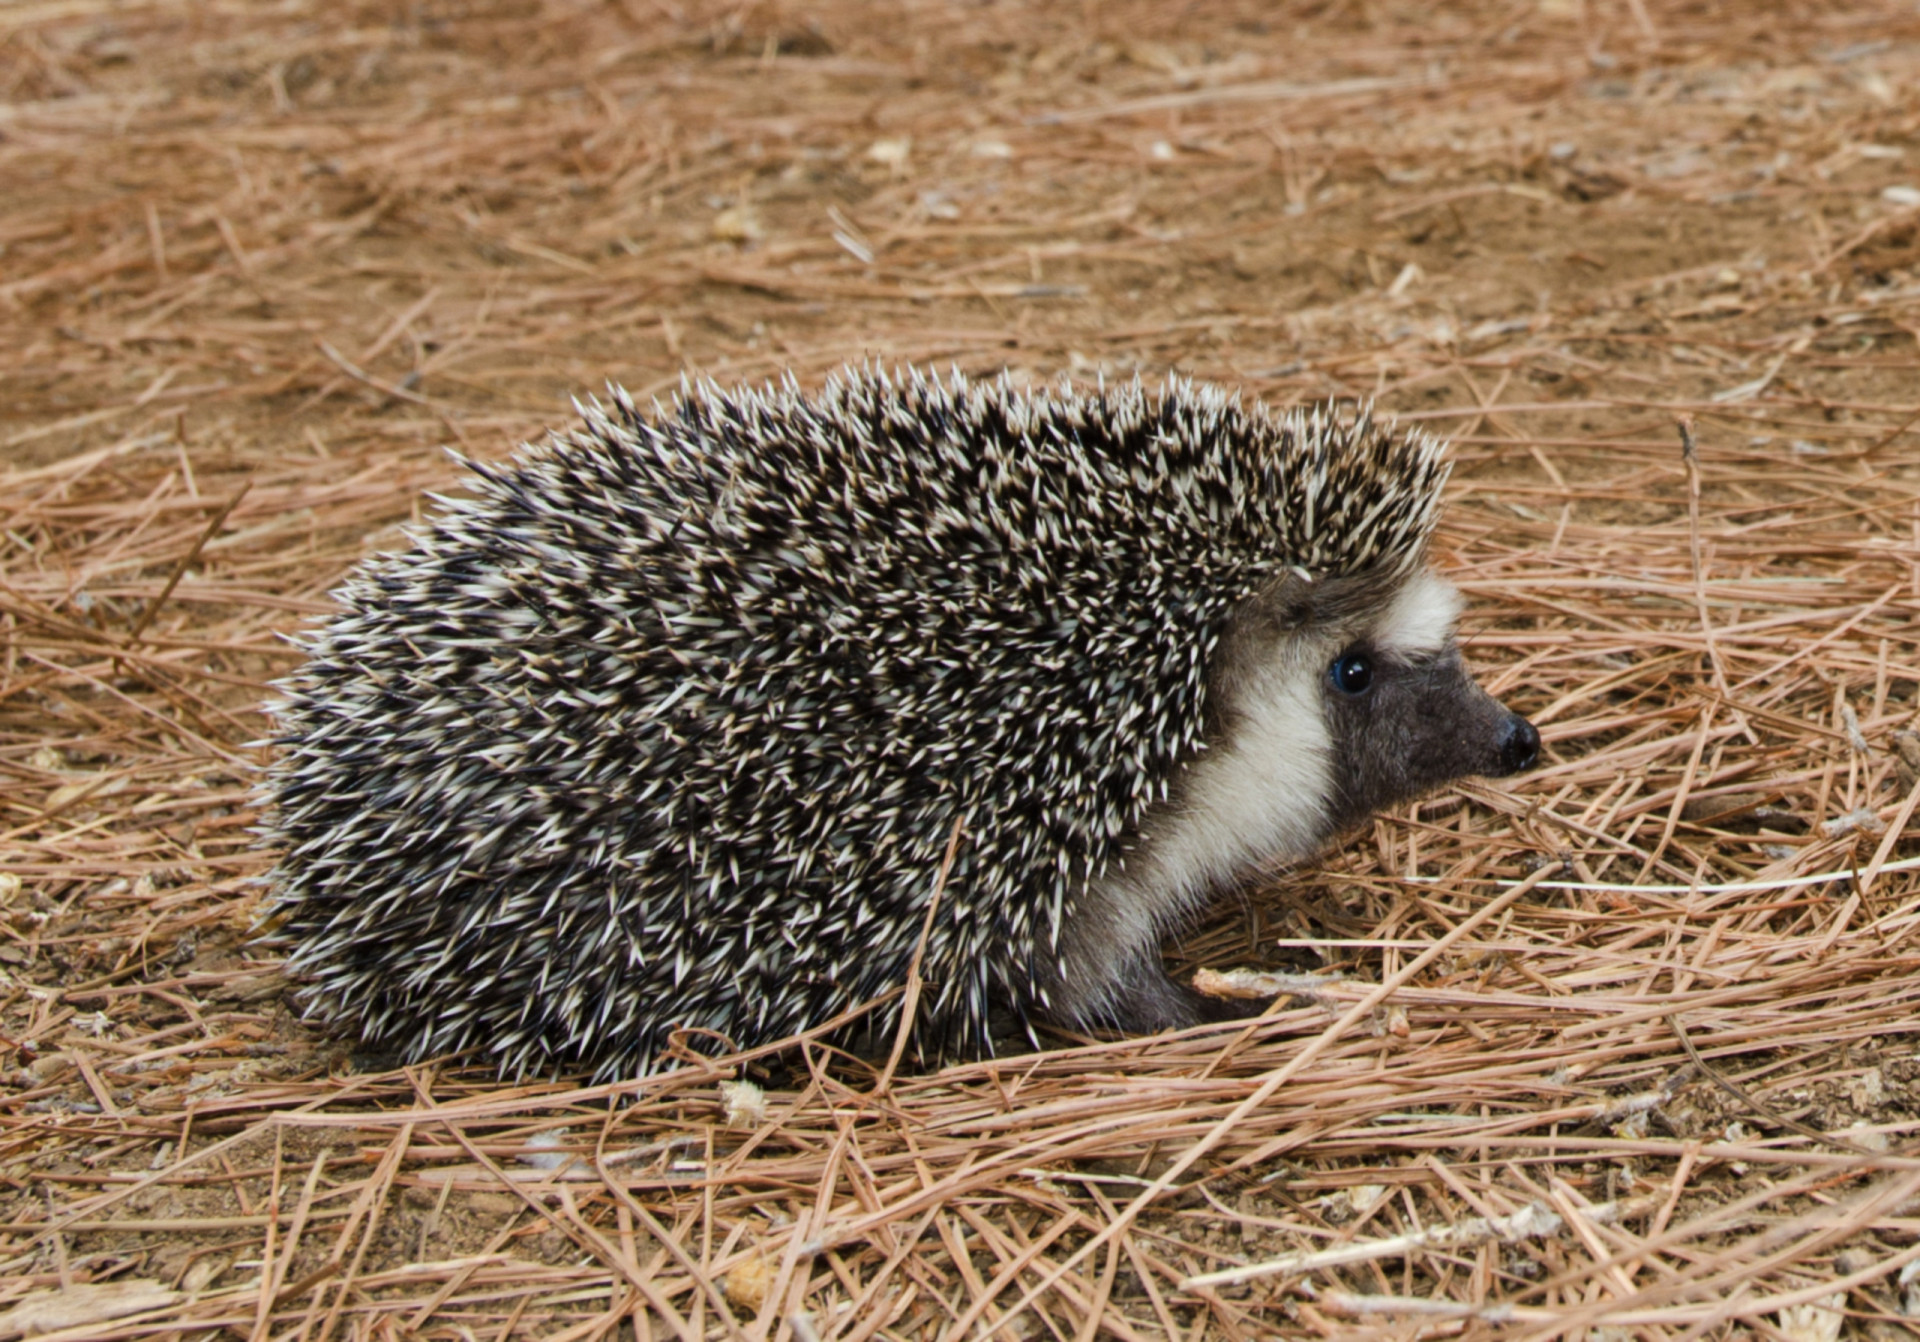 <p>This spiky little guy is native to North Africa but has found its way over to southern Spain, probably introduced by humans. Unusually for hedgehogs, this species is able to survive in dry desert regions such as Tabernas.</p><p>You may also like:<a href="https://www.starsinsider.com/n/407210?utm_source=msn.com&utm_medium=display&utm_campaign=referral_description&utm_content=570754en-en"> Watch out for these silly things we spend too much money on</a></p>